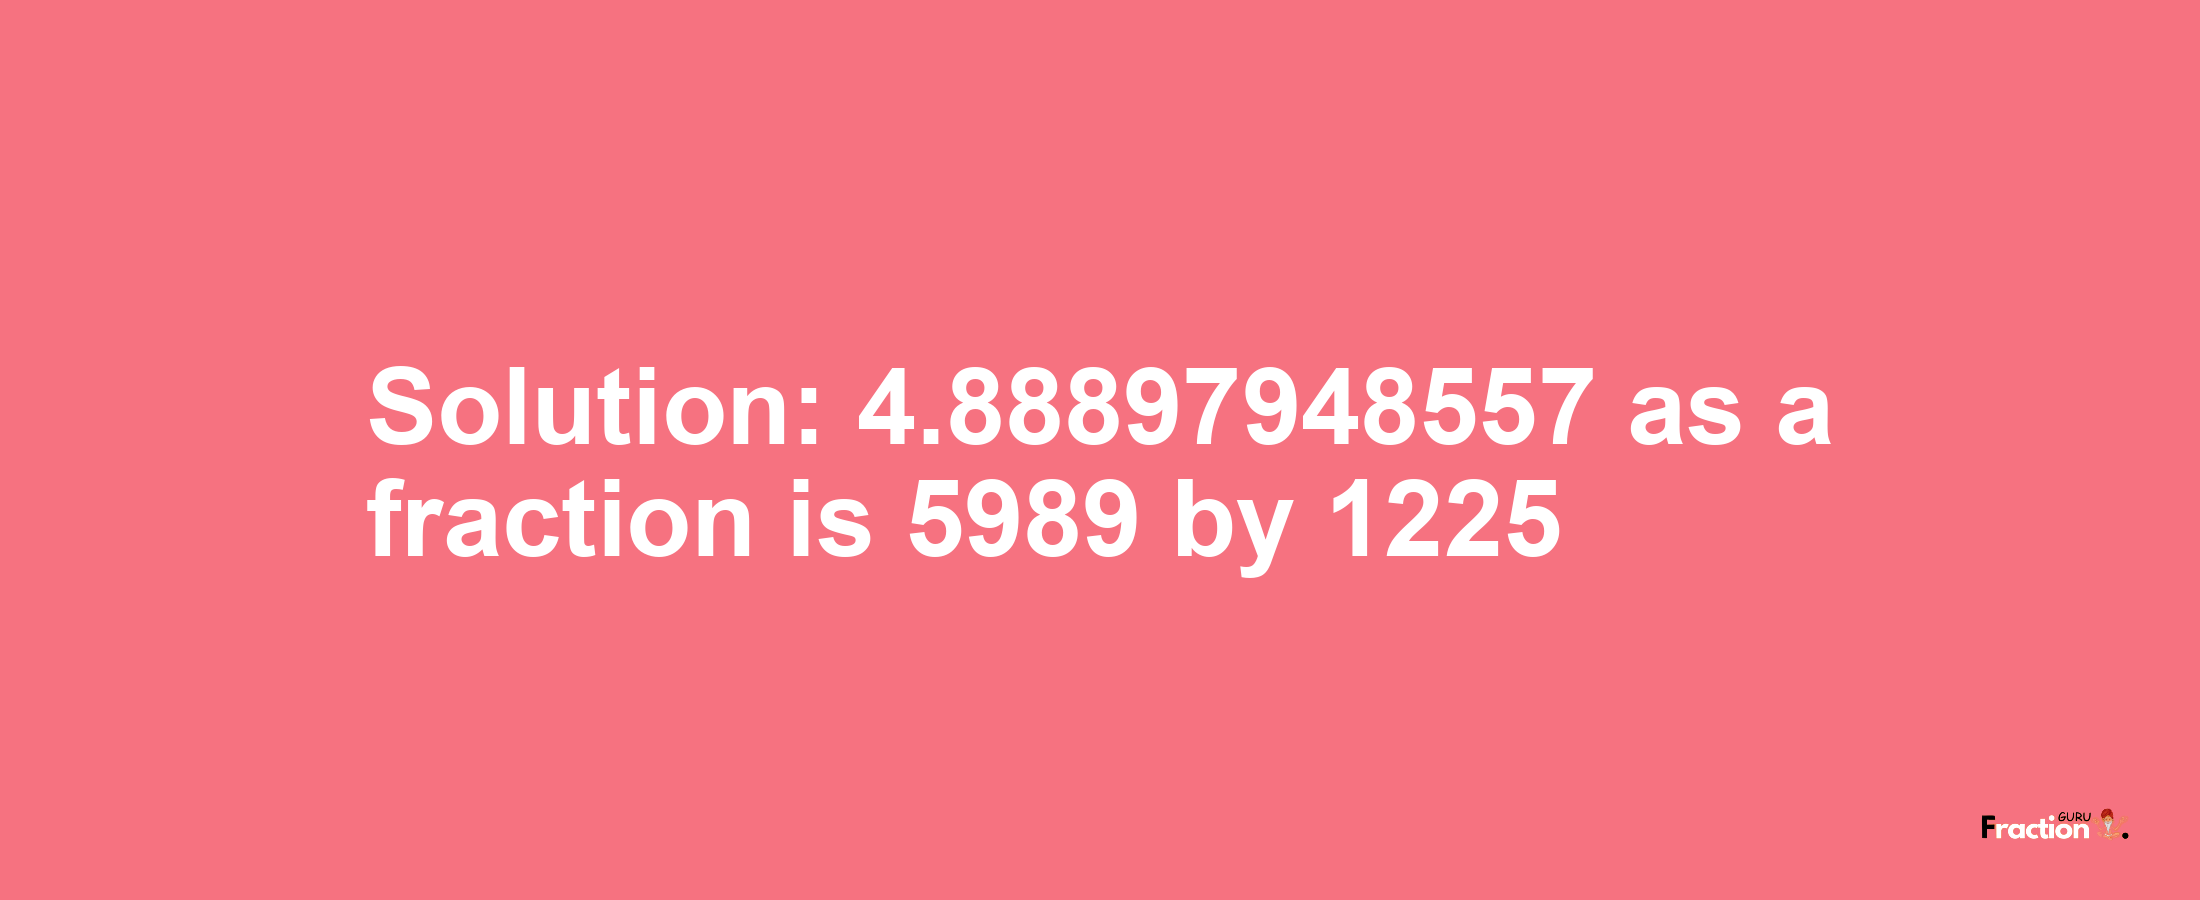 Solution:4.88897948557 as a fraction is 5989/1225